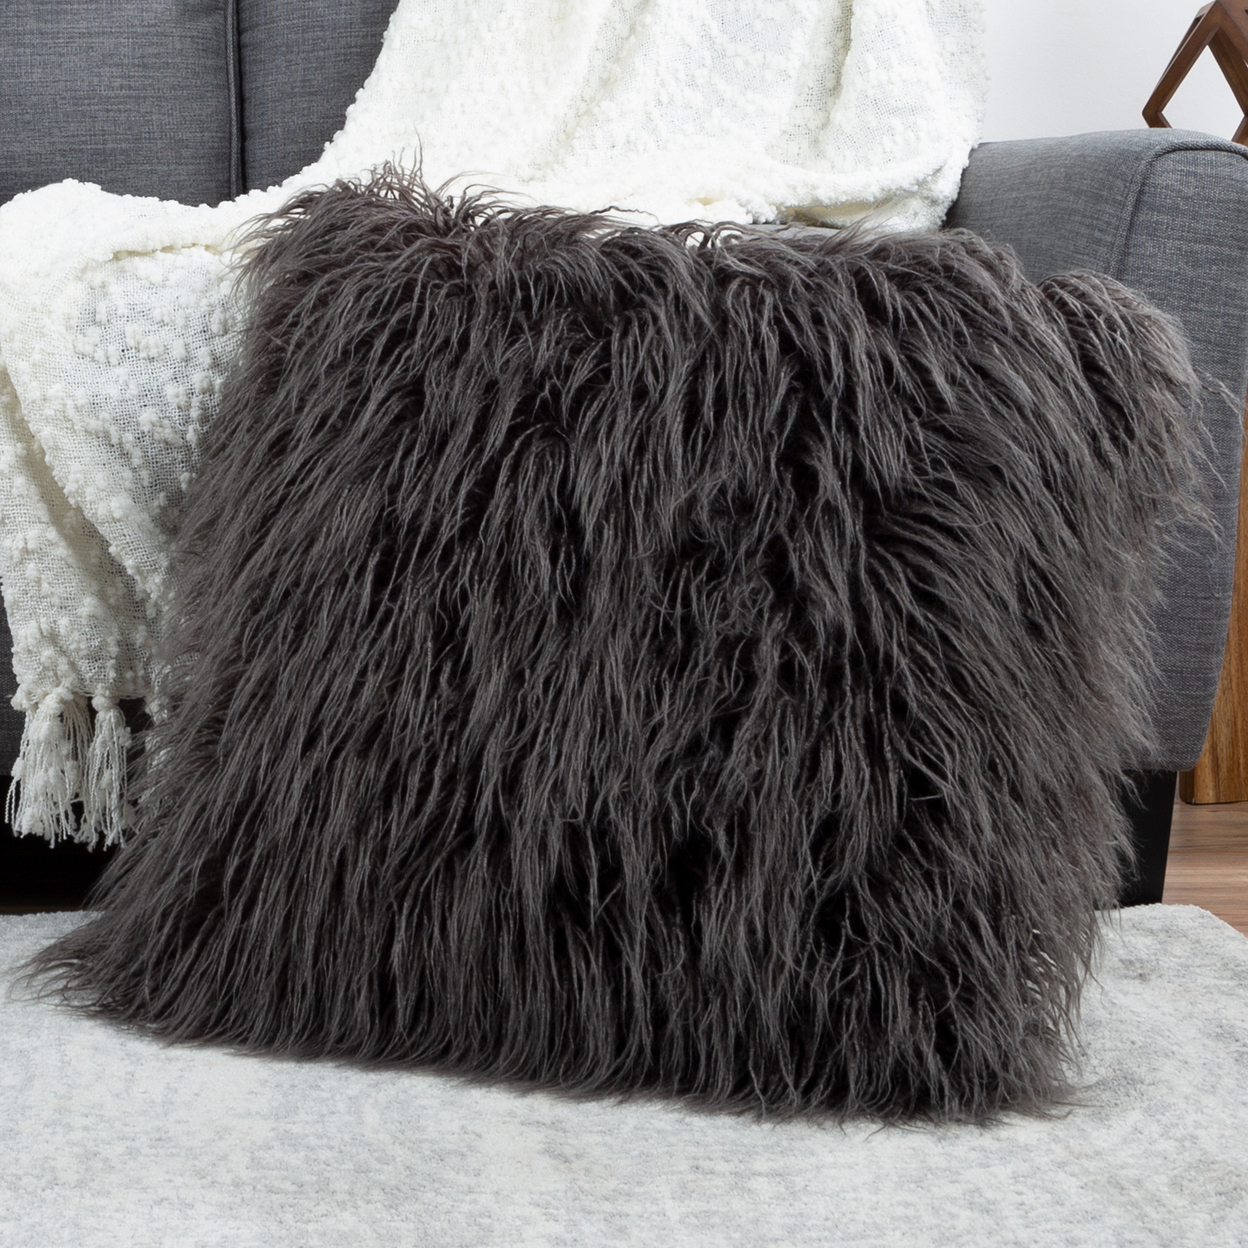 22 In Mongolian Faux Fur Throw Accent Pillow 7 In Thick Square Shag Style XL - Gray